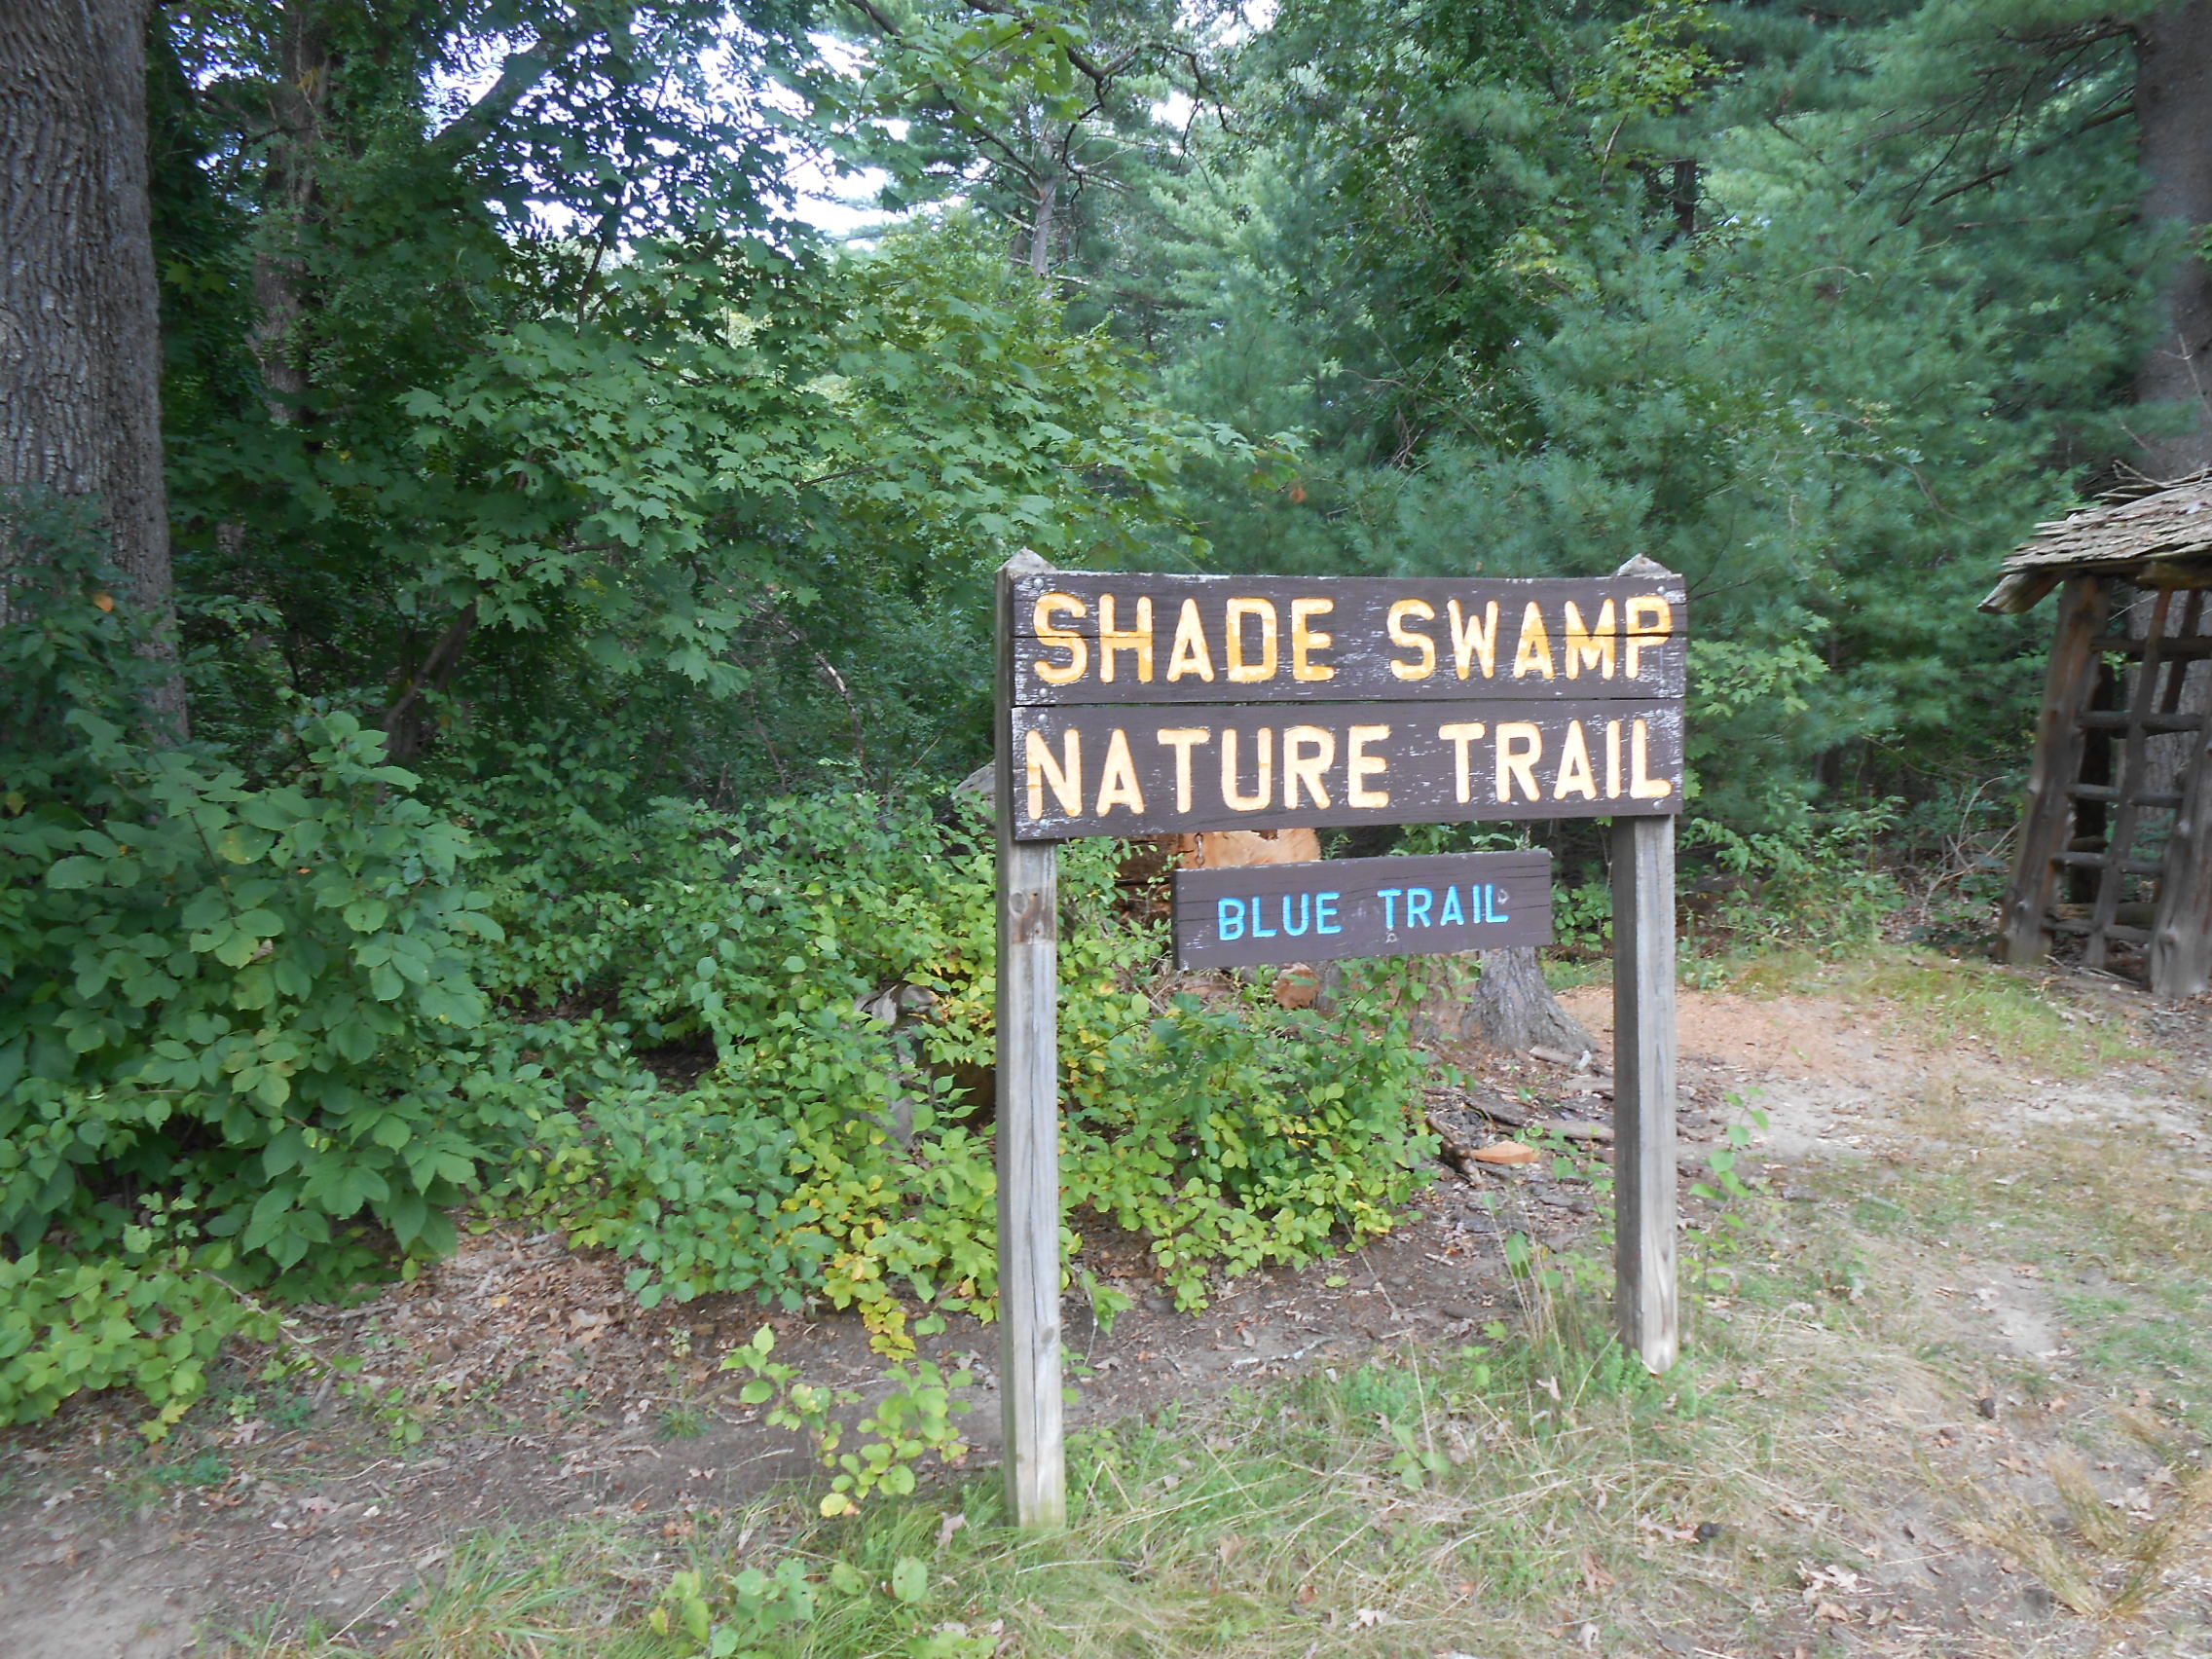 Shade Swamp Nature Trail sign in parking area